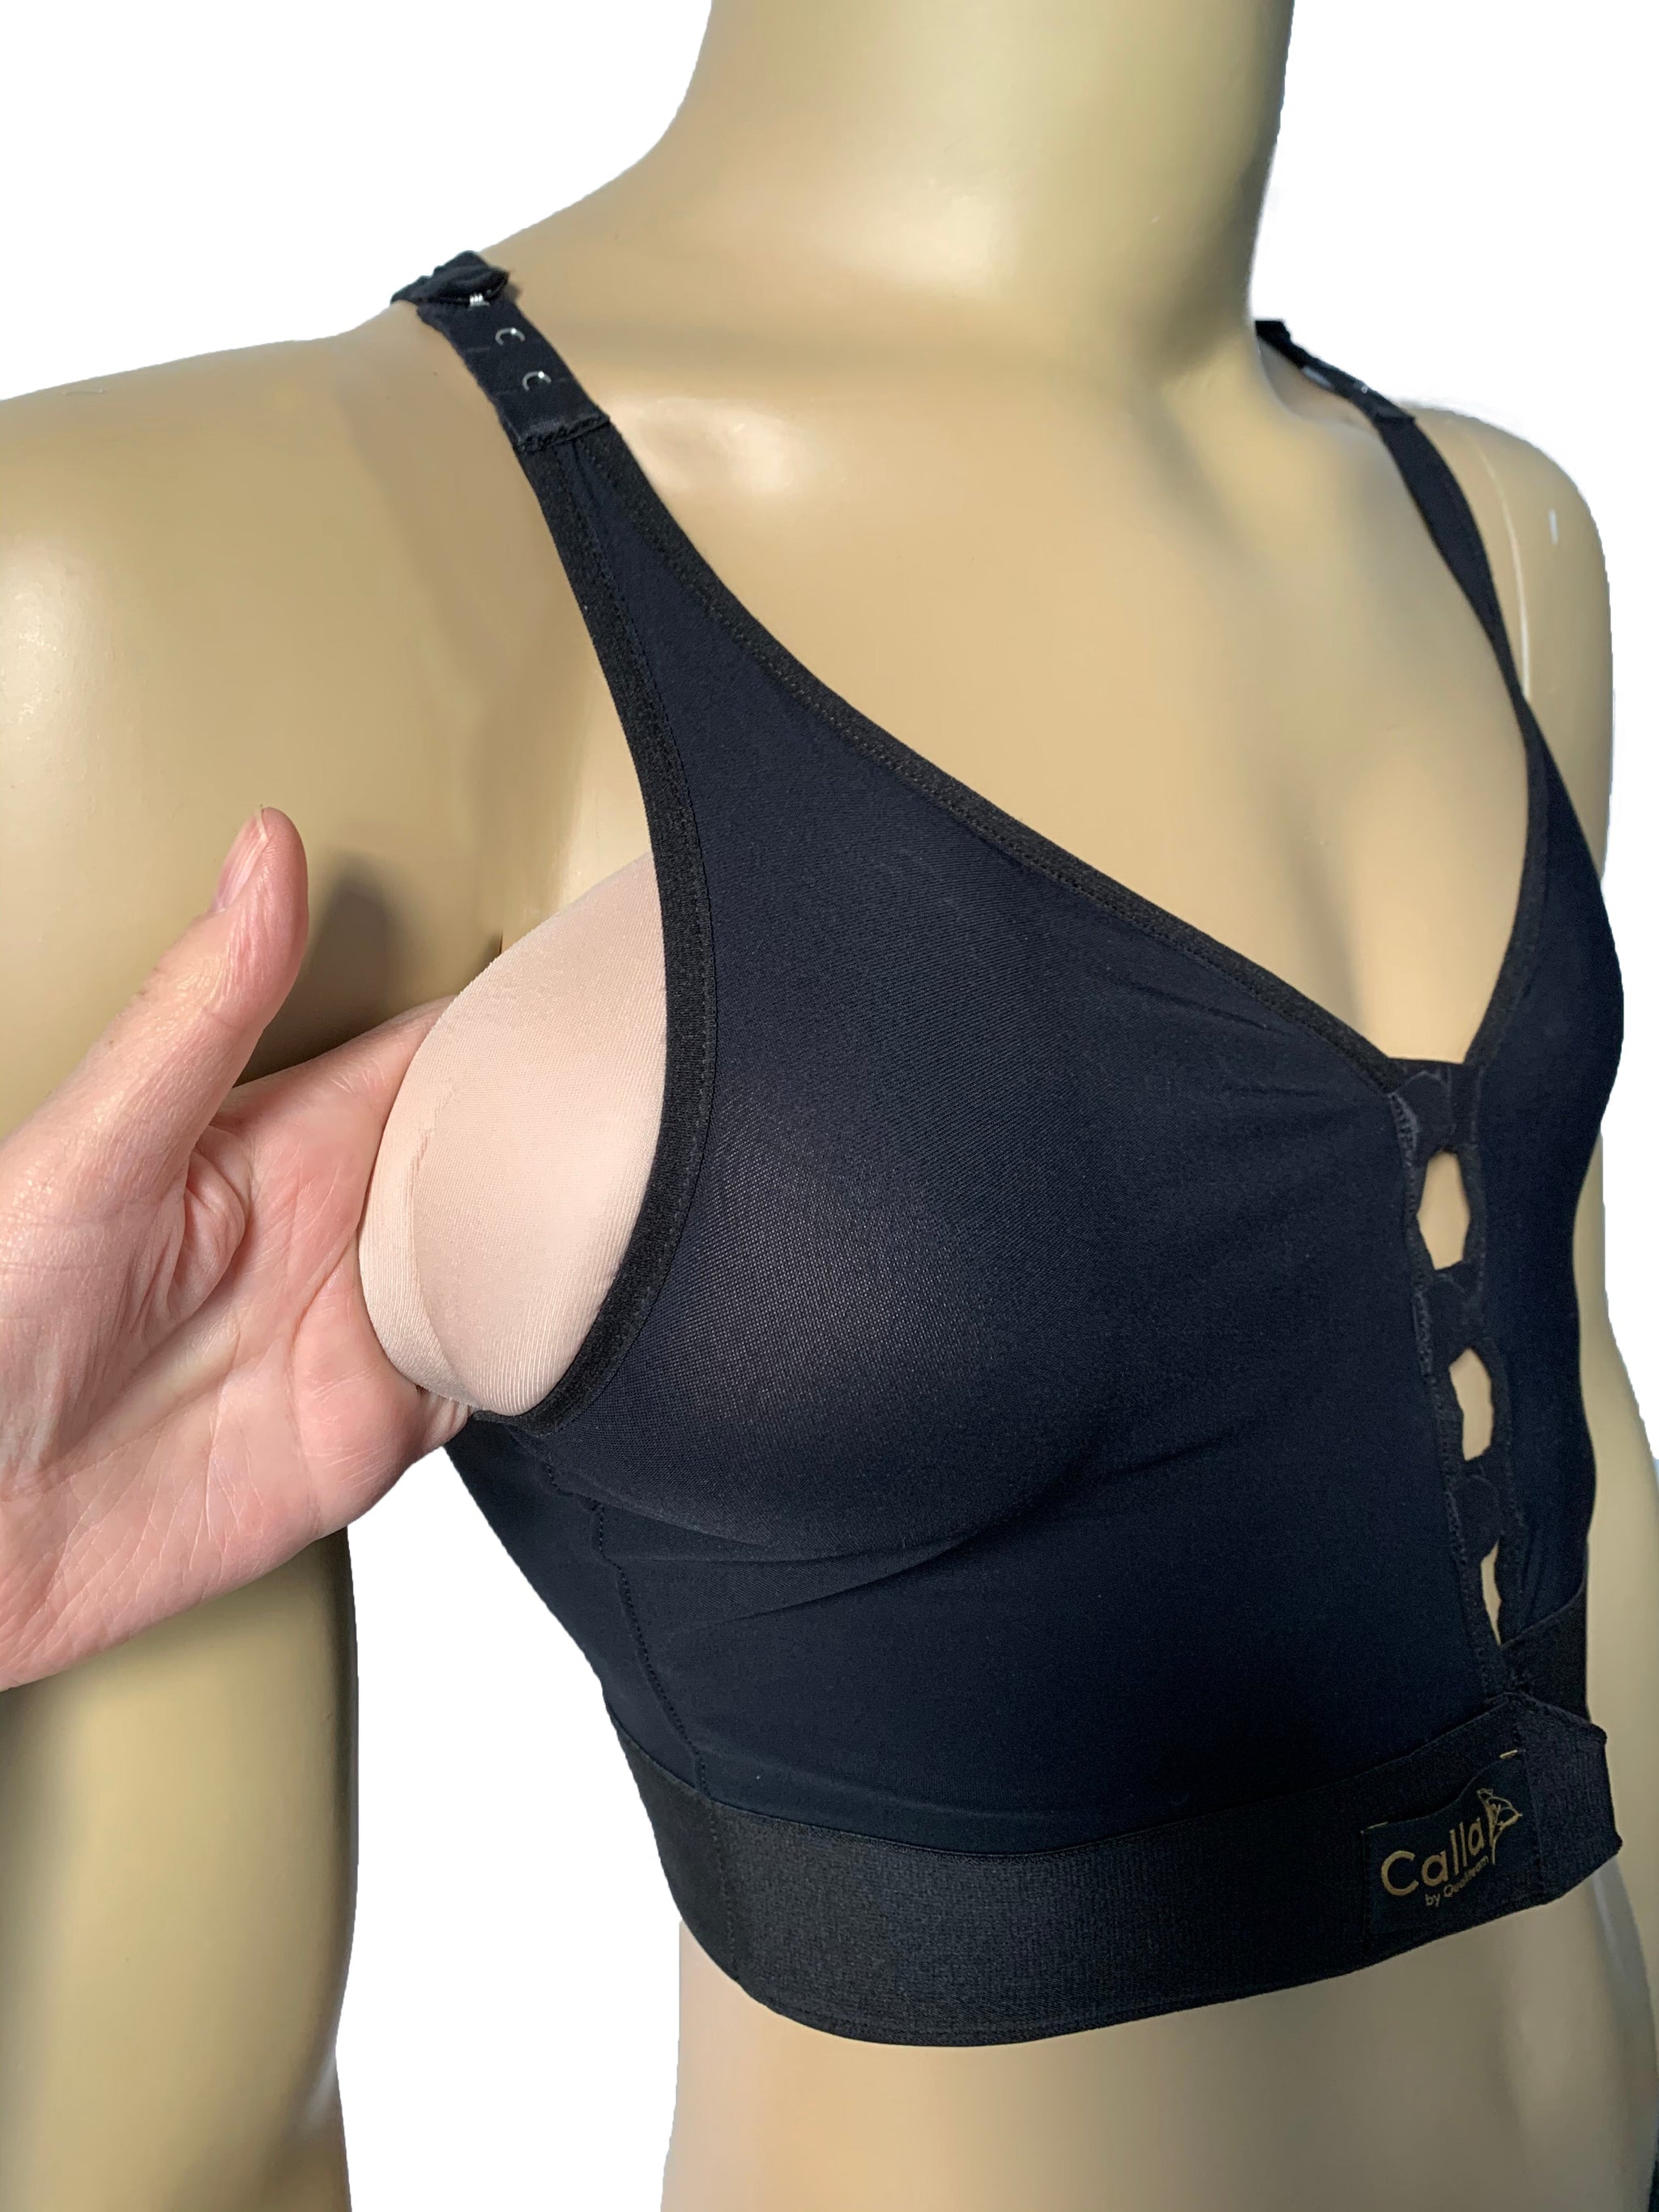 Breast implant stabilizer band - Calla by Qualiteam